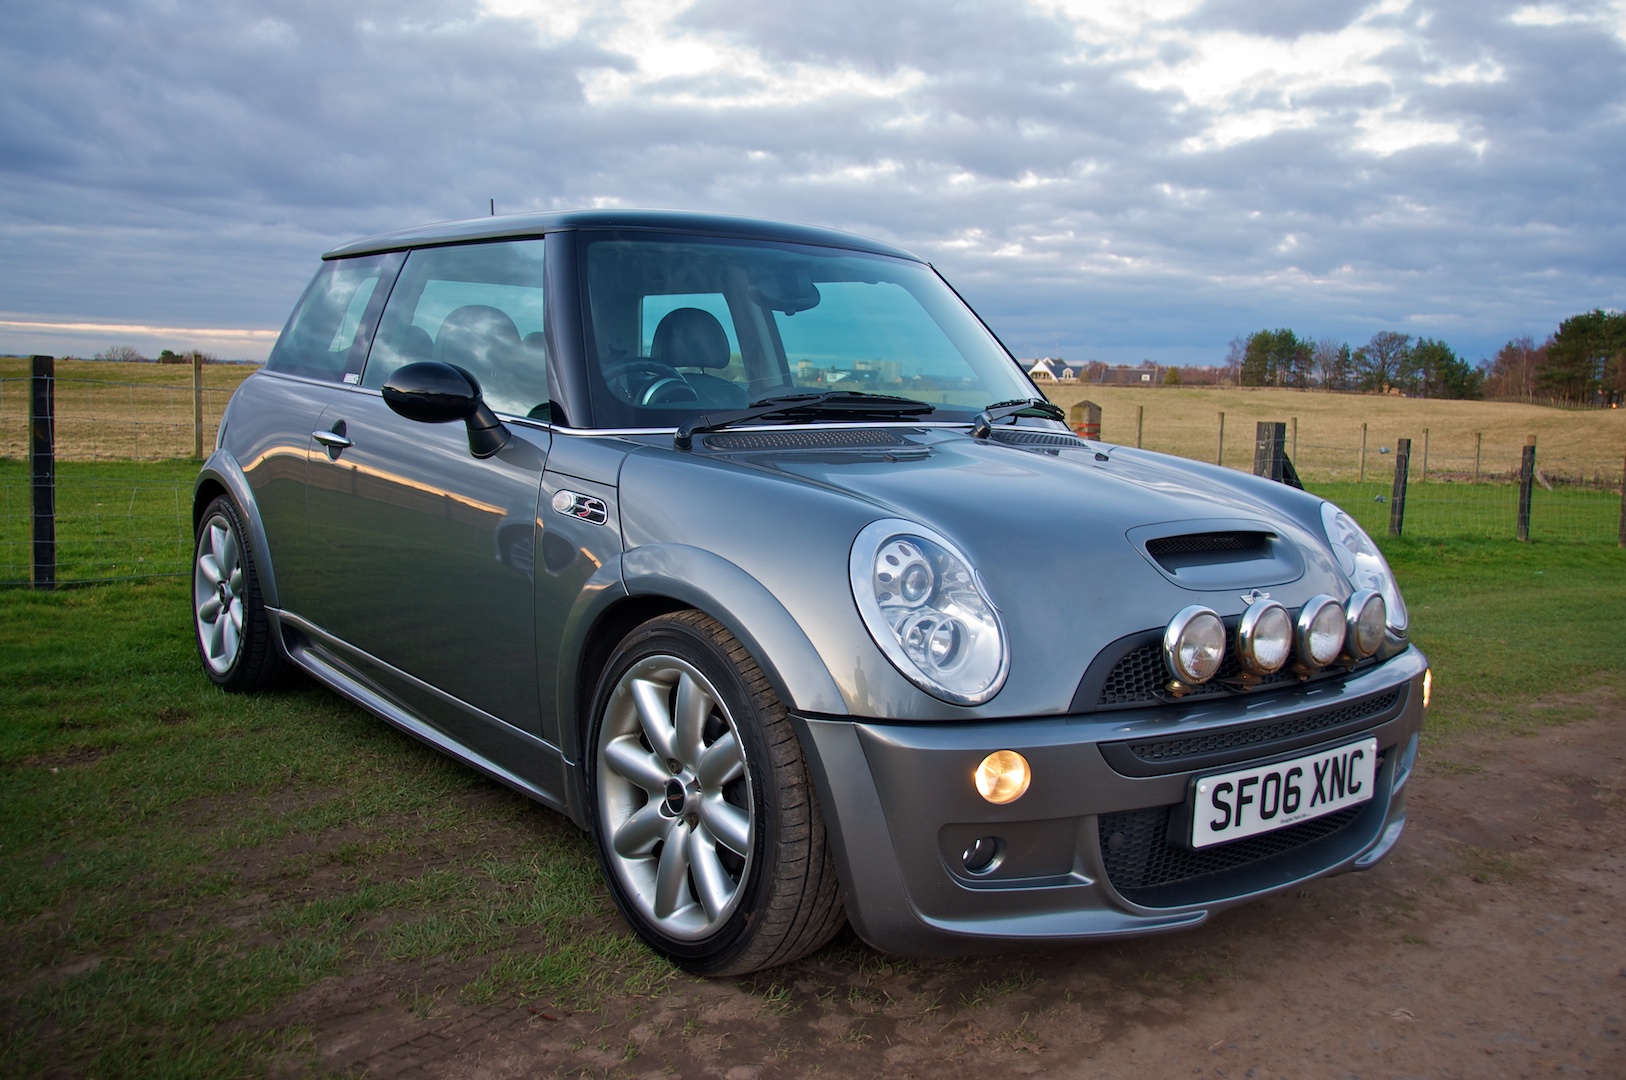 Mini Cooper S Works, March 2011 | Flickr - Photo Sharing!